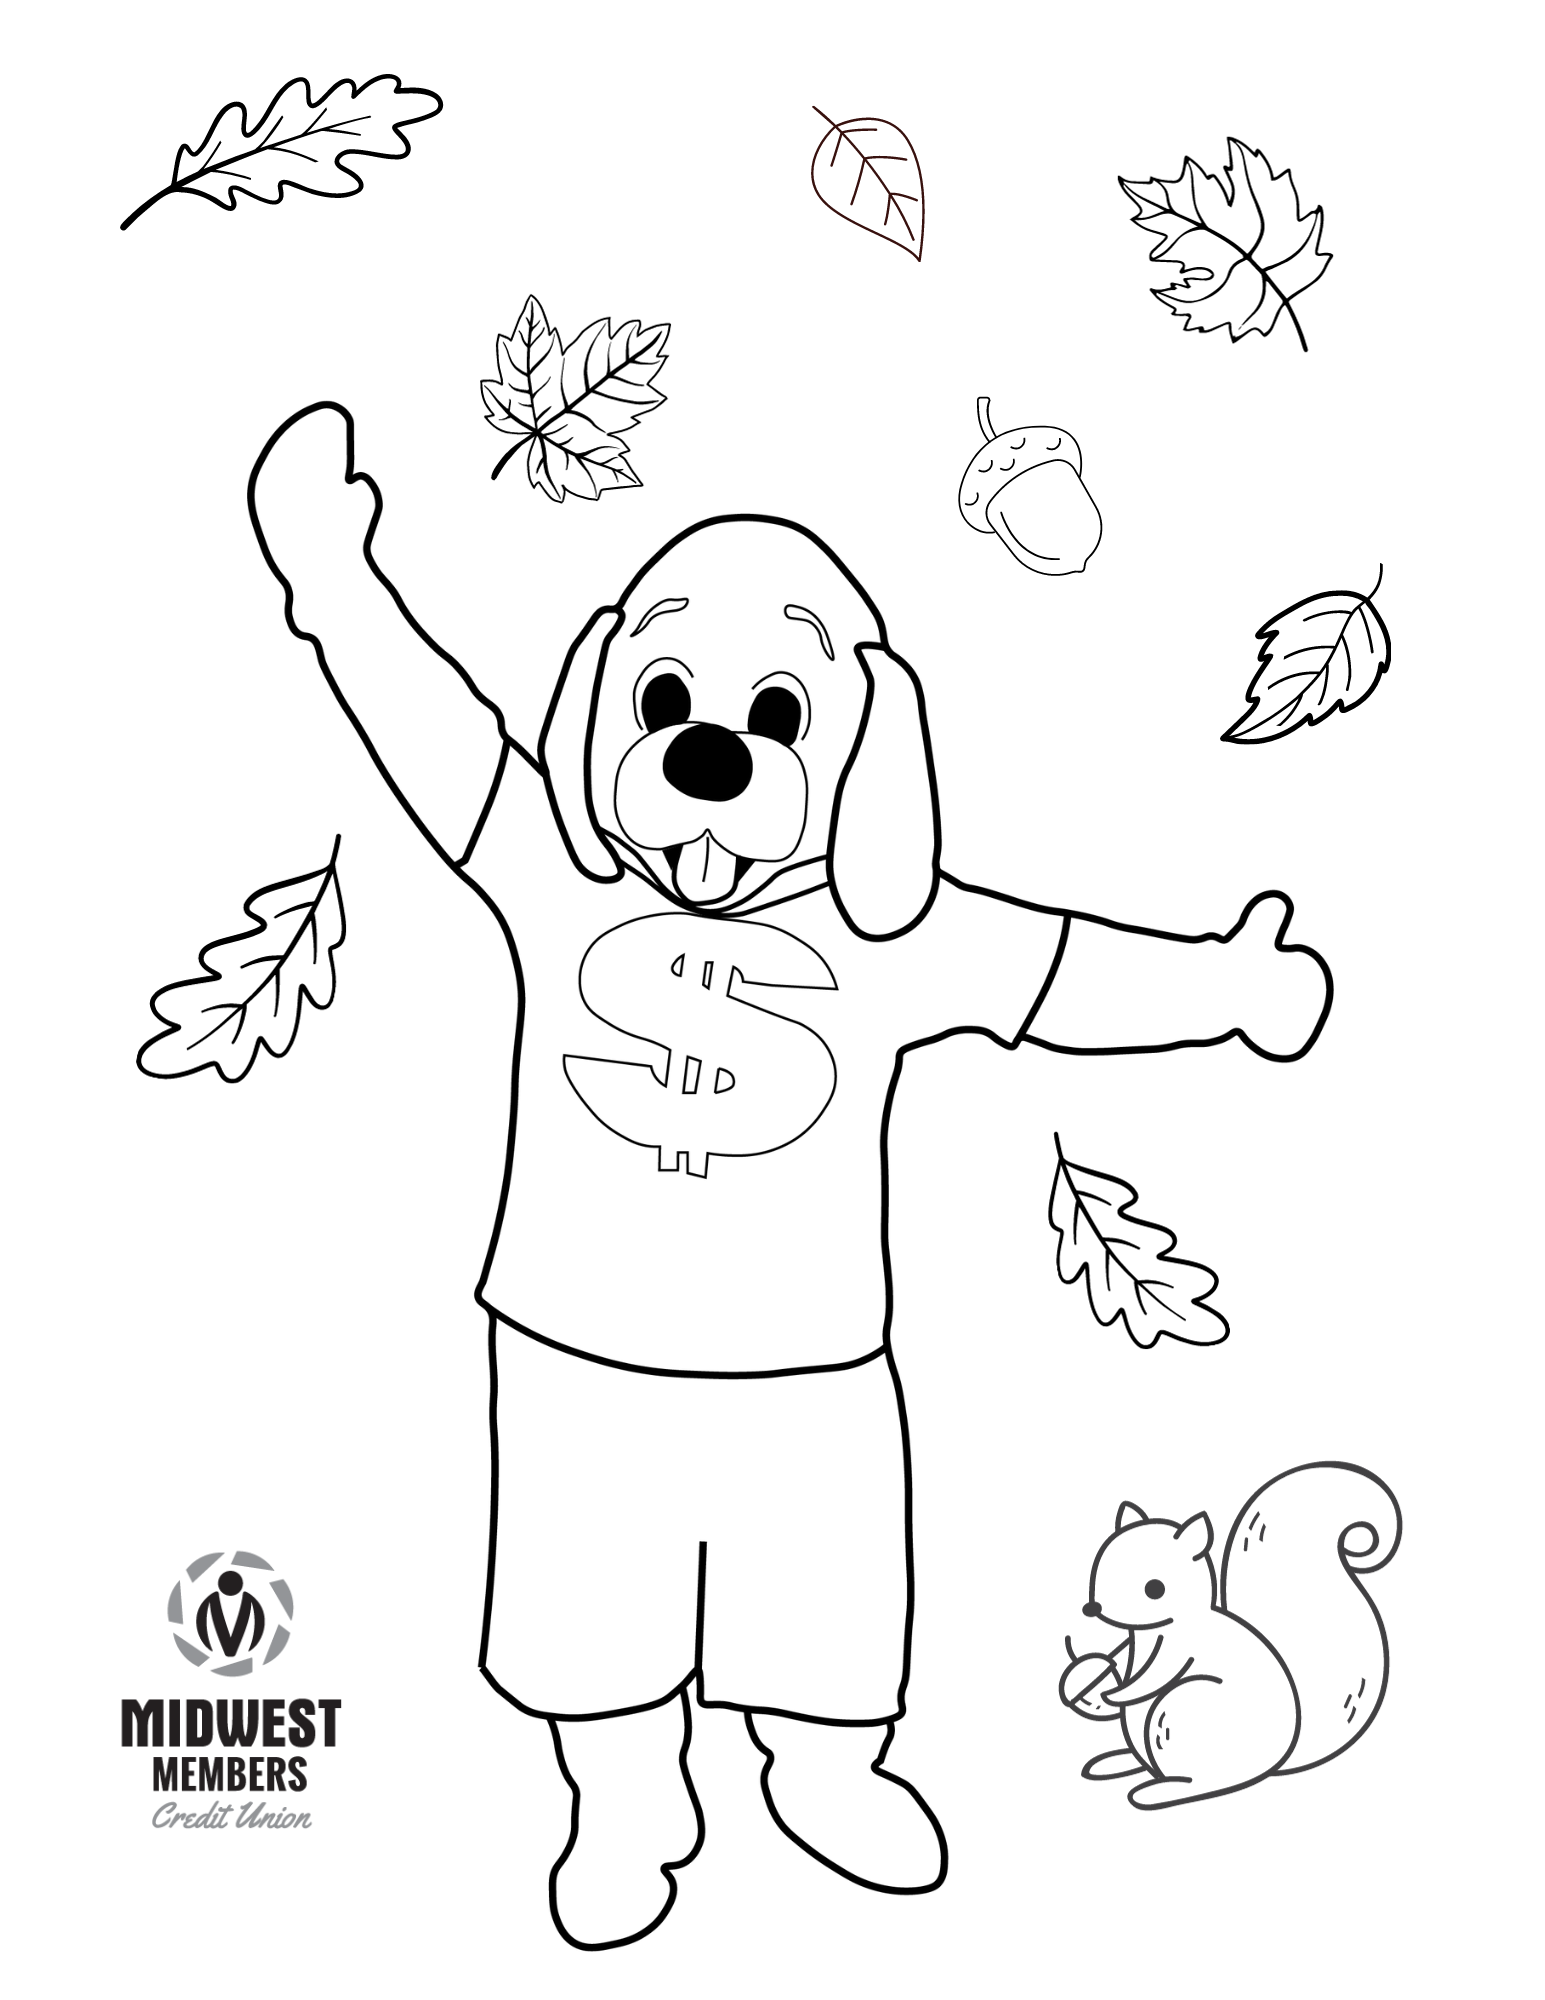 Fall Coloring Page.pdf